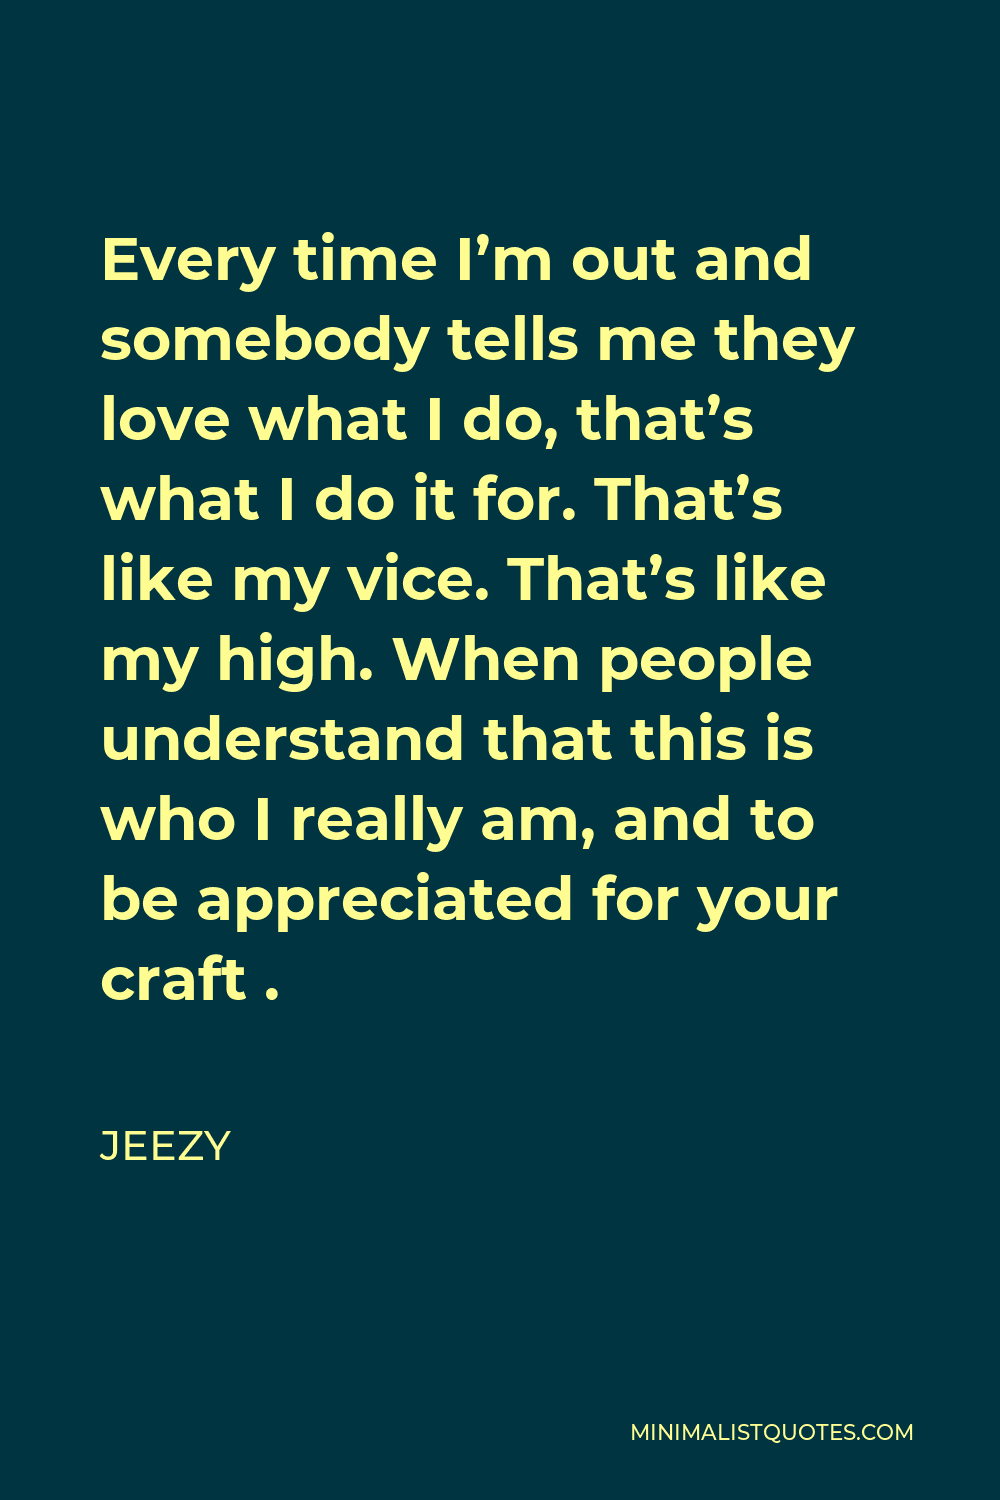 Jeezy Quote - Every time I’m out and somebody tells me they love what I do, that’s what I do it for. That’s like my vice. That’s like my high. When people understand that this is who I really am, and to be appreciated for your craft .